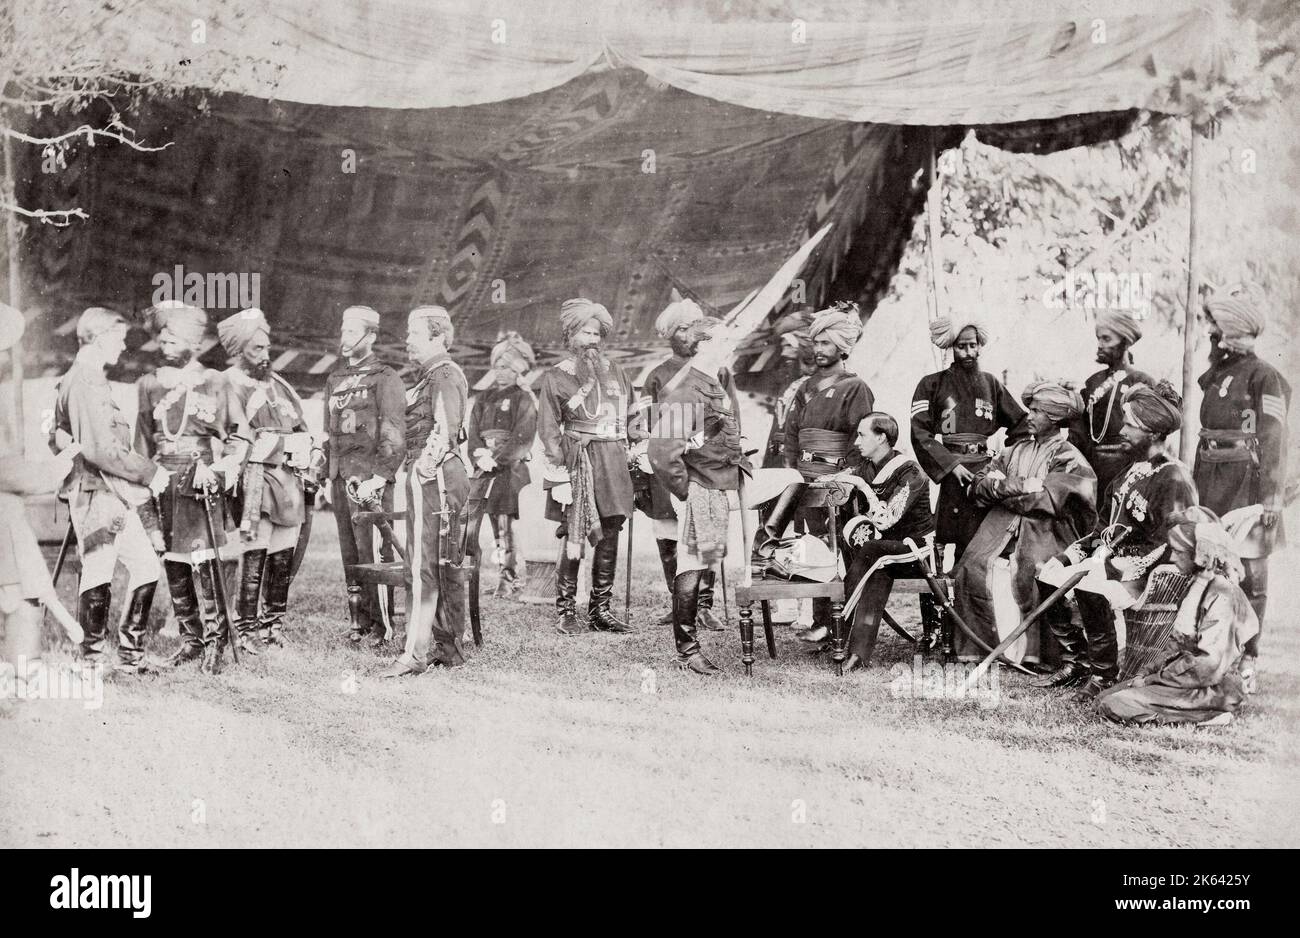 1860s' vintage photograph - British army in India - officers of the 19th Bengal Lancers Stock Photo